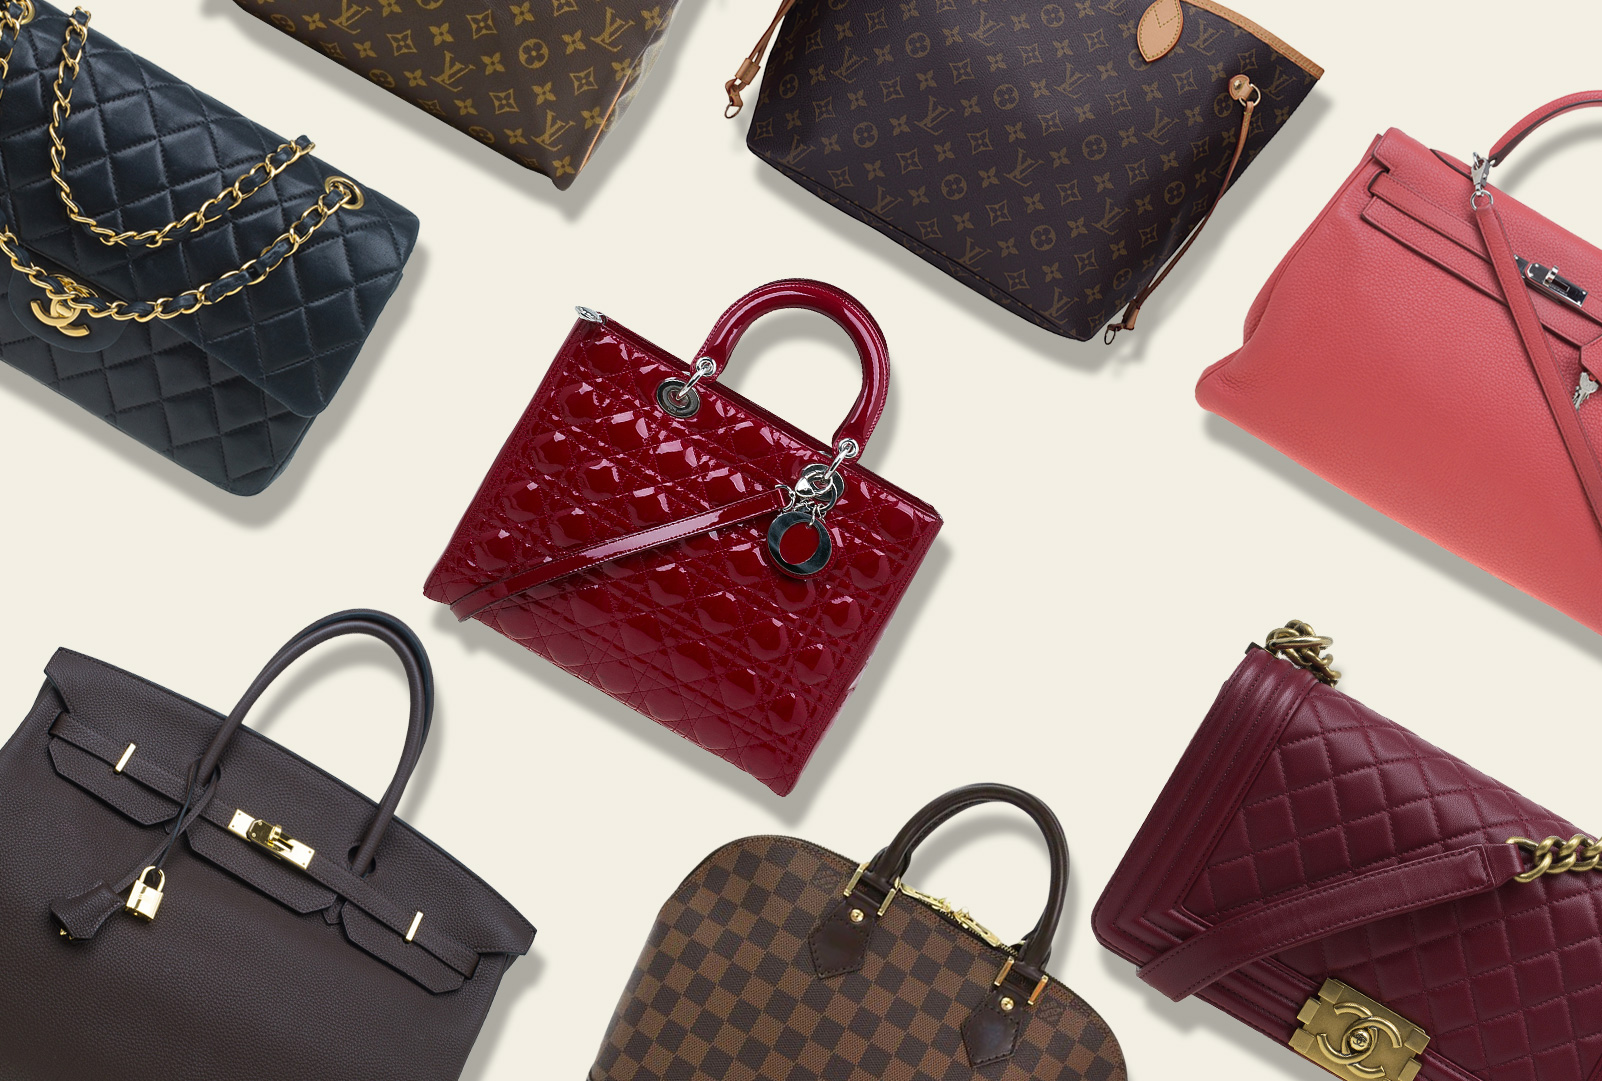 The Handbags Worth Investing In – Inside The Closet